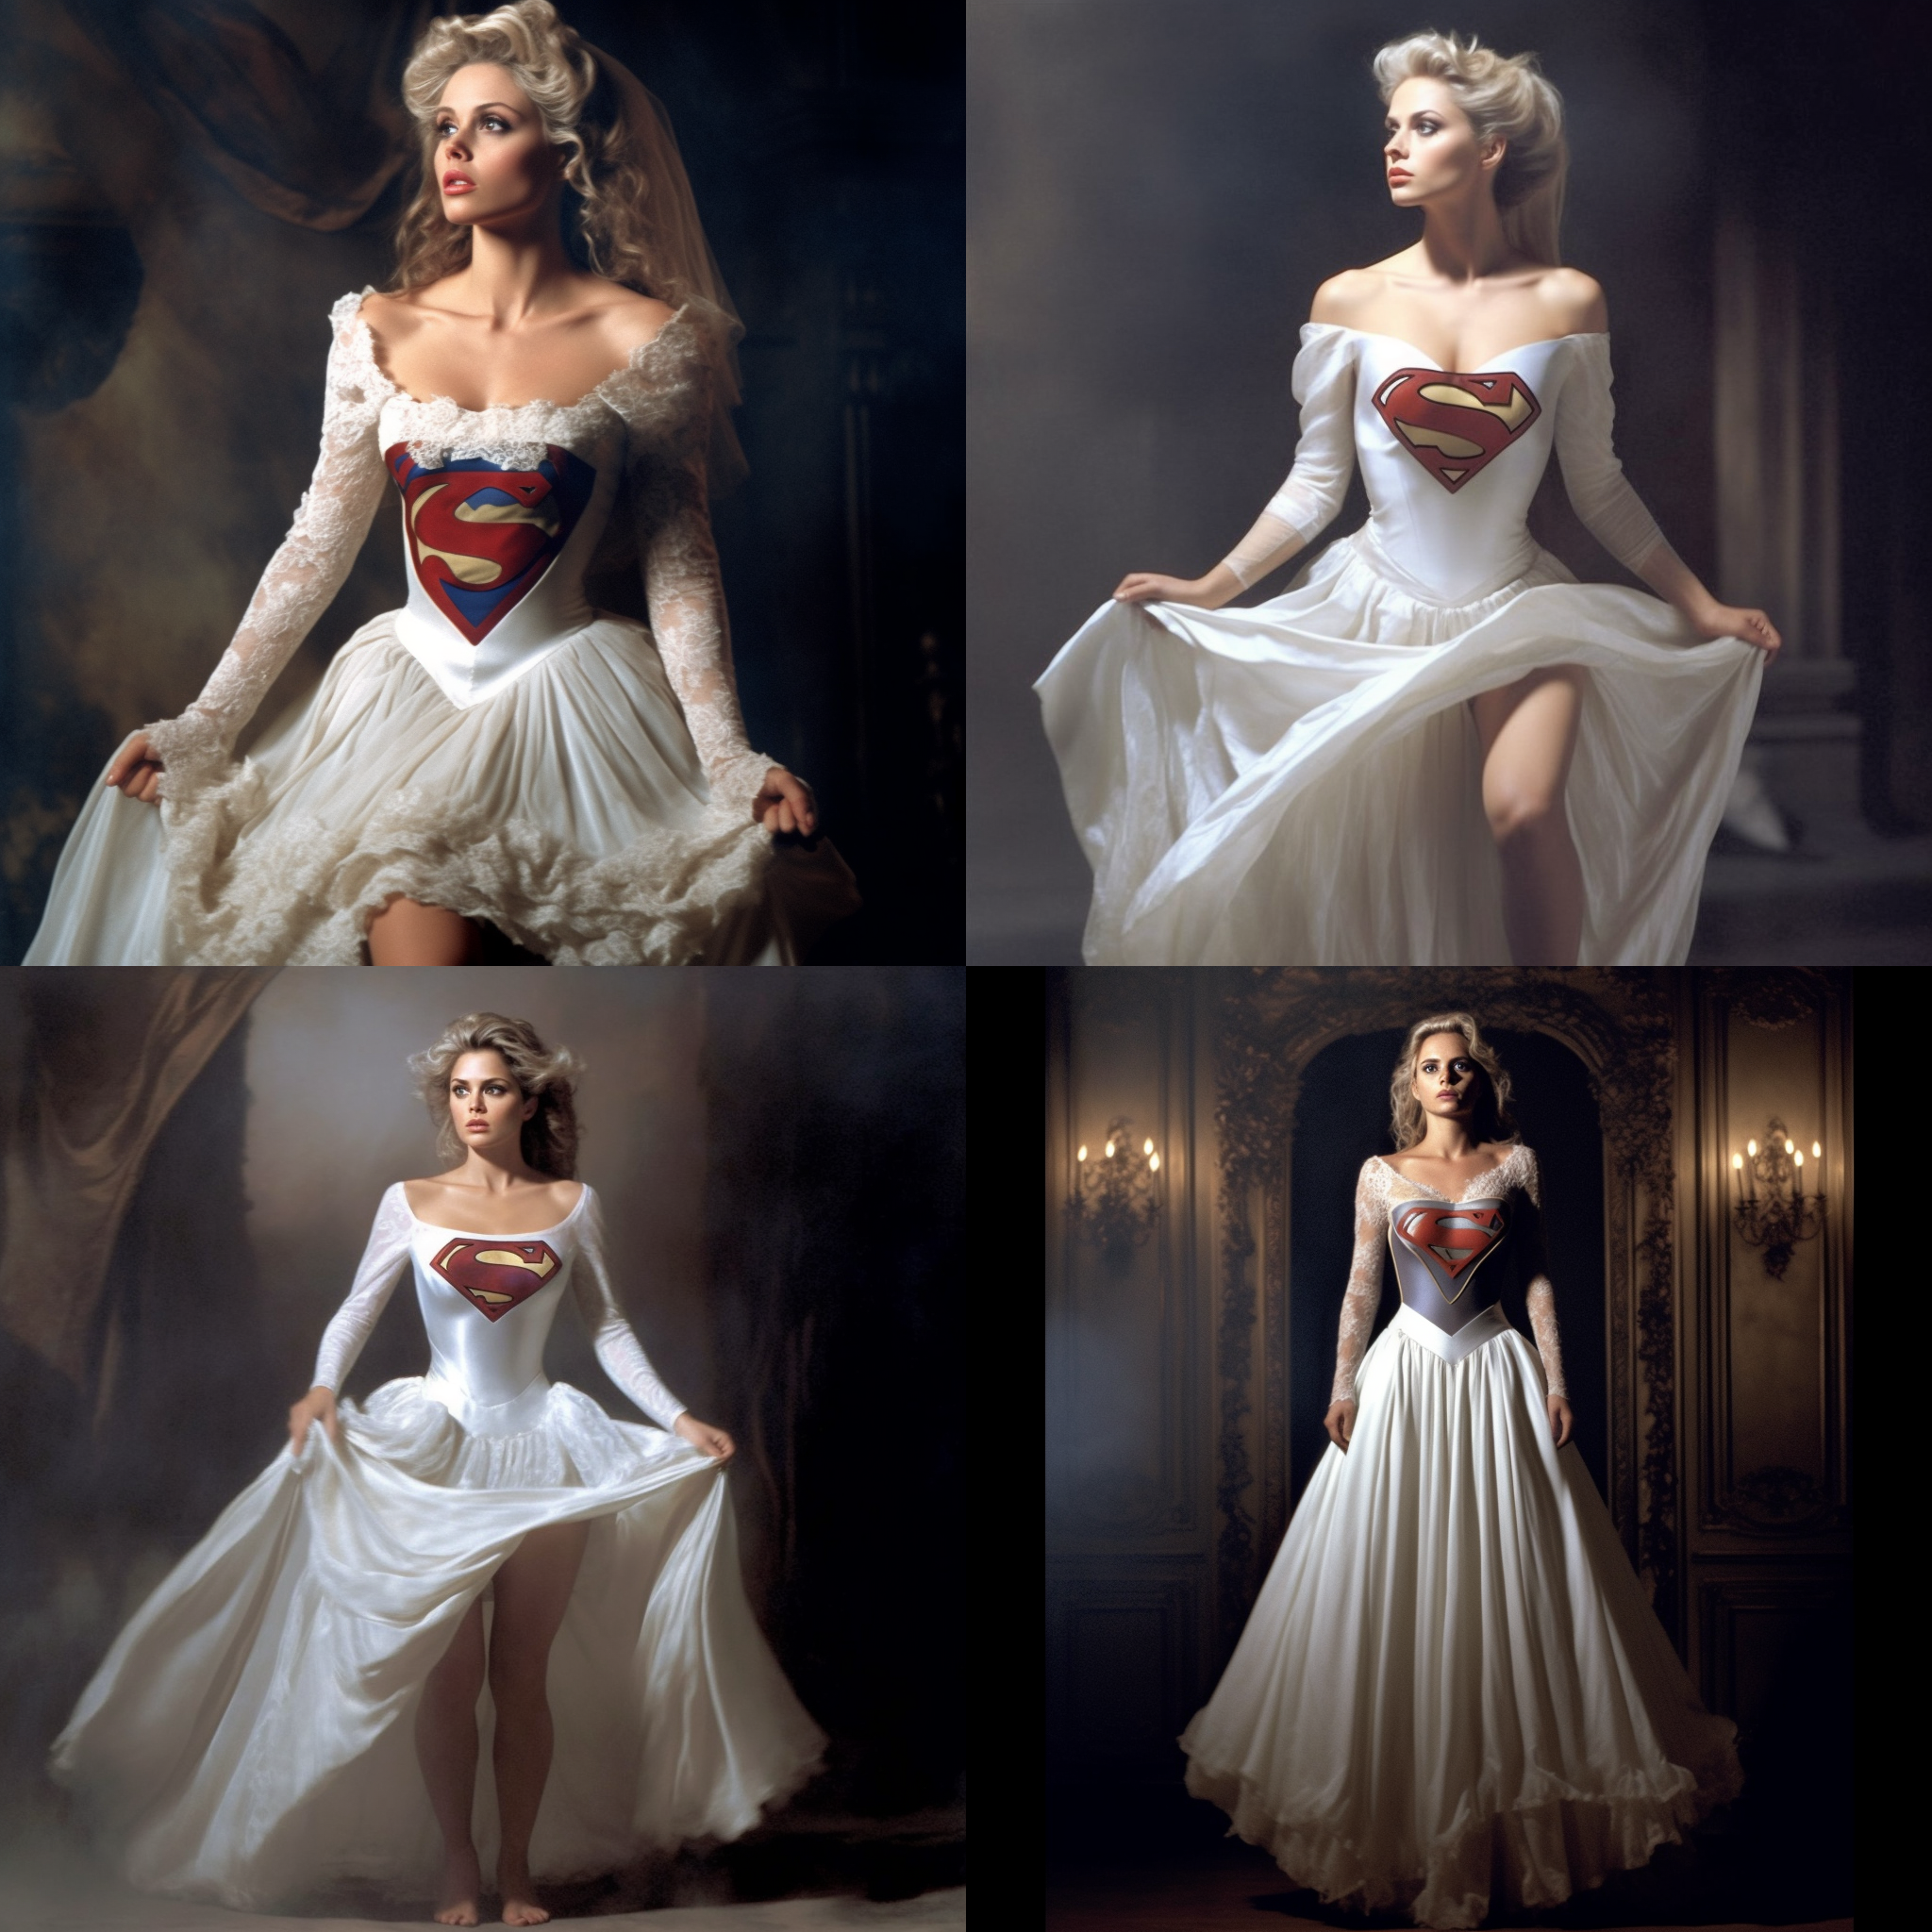 Sir_Frogdick_dressed_in_wedding_dress_ce8fb295-0899-44c2-8d56-9c164bd29a59.png